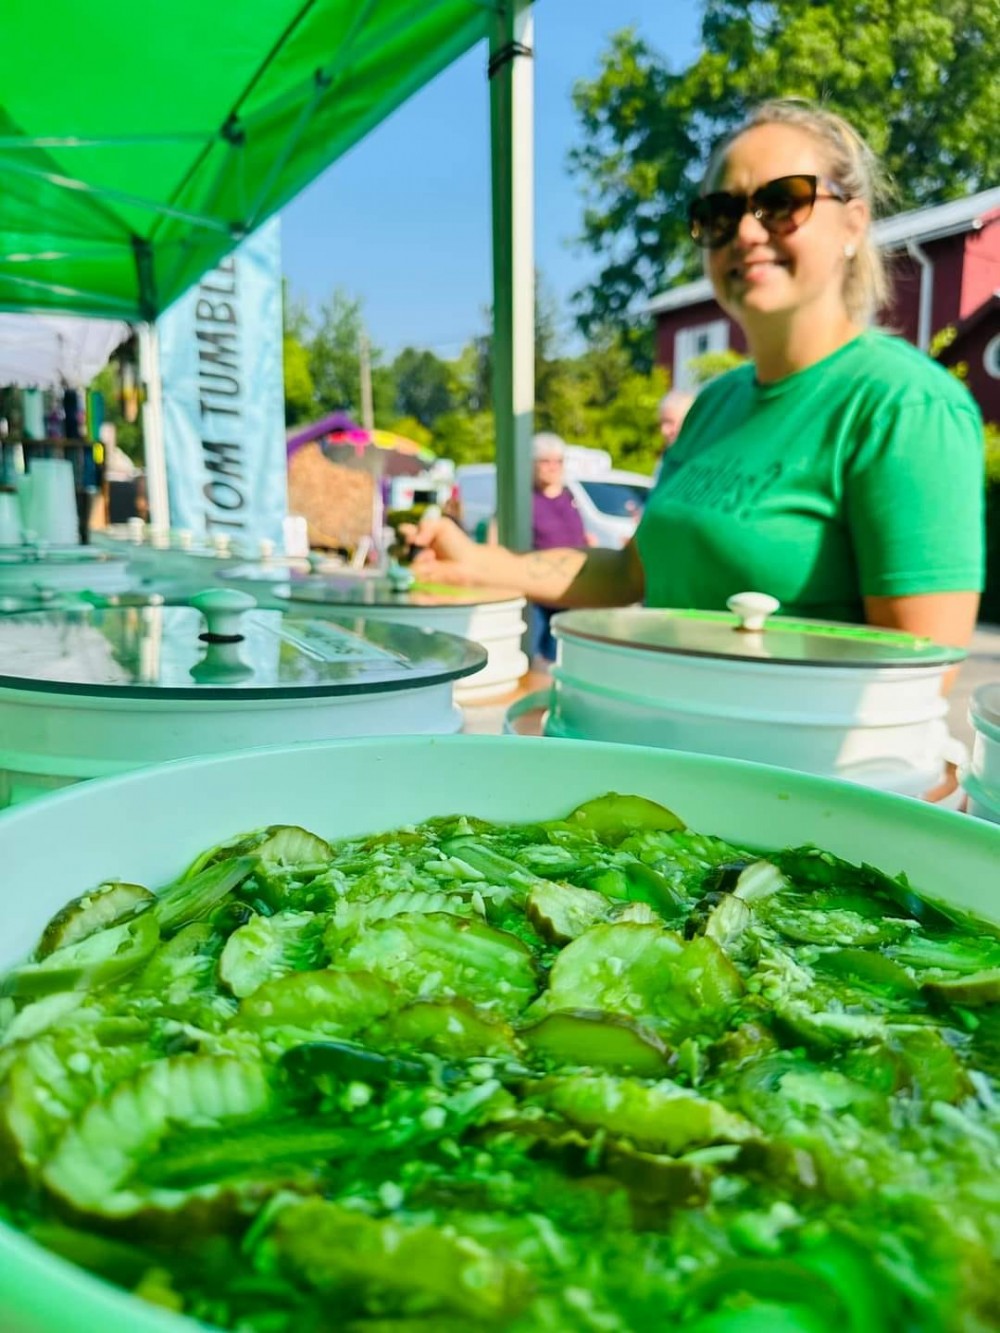 The Crazy Cucumber at Pickle Fest